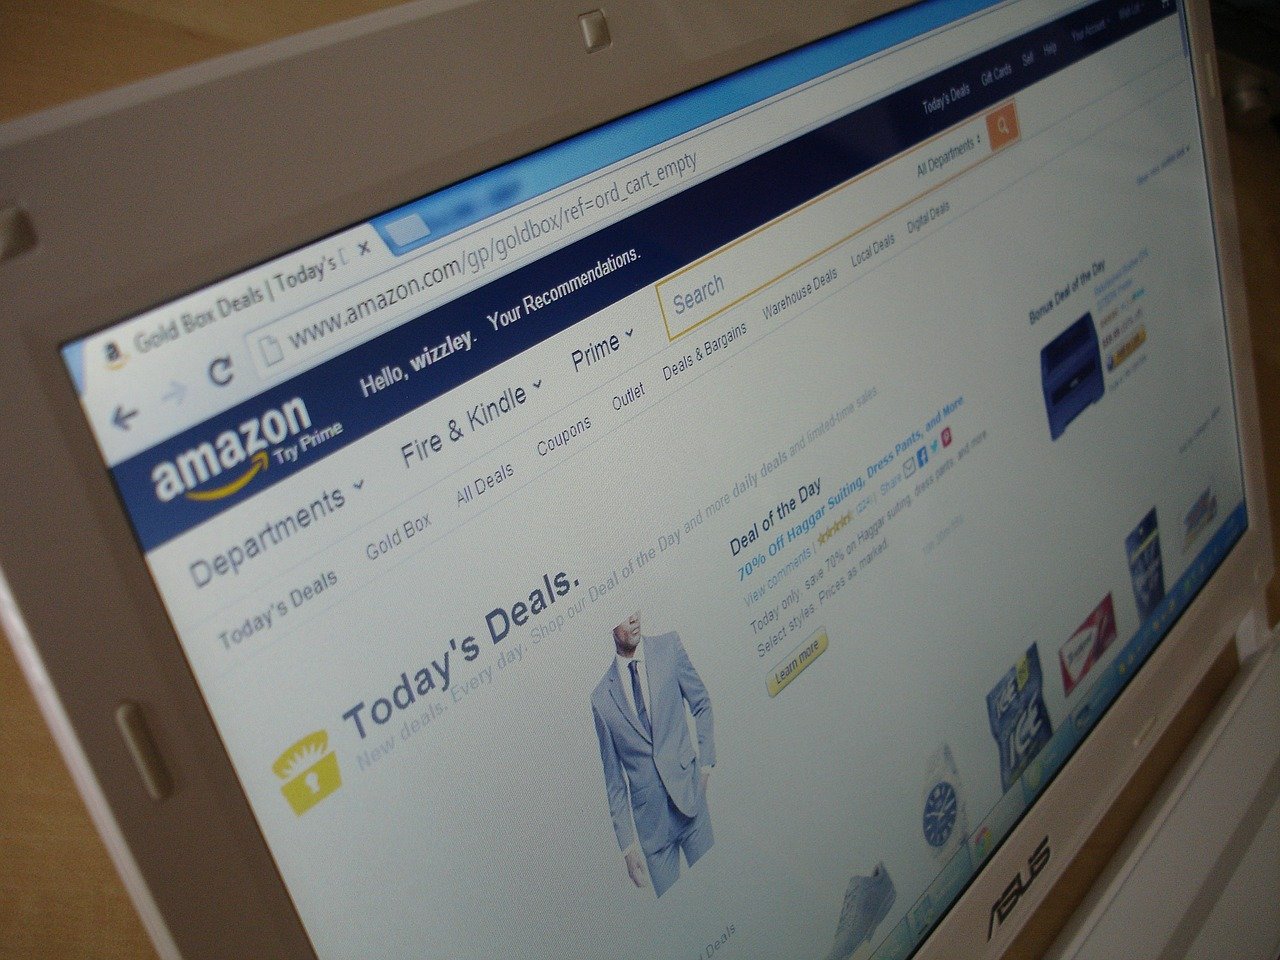 Amazon appeals $865M fine imposed by Luxembourg data protection authority